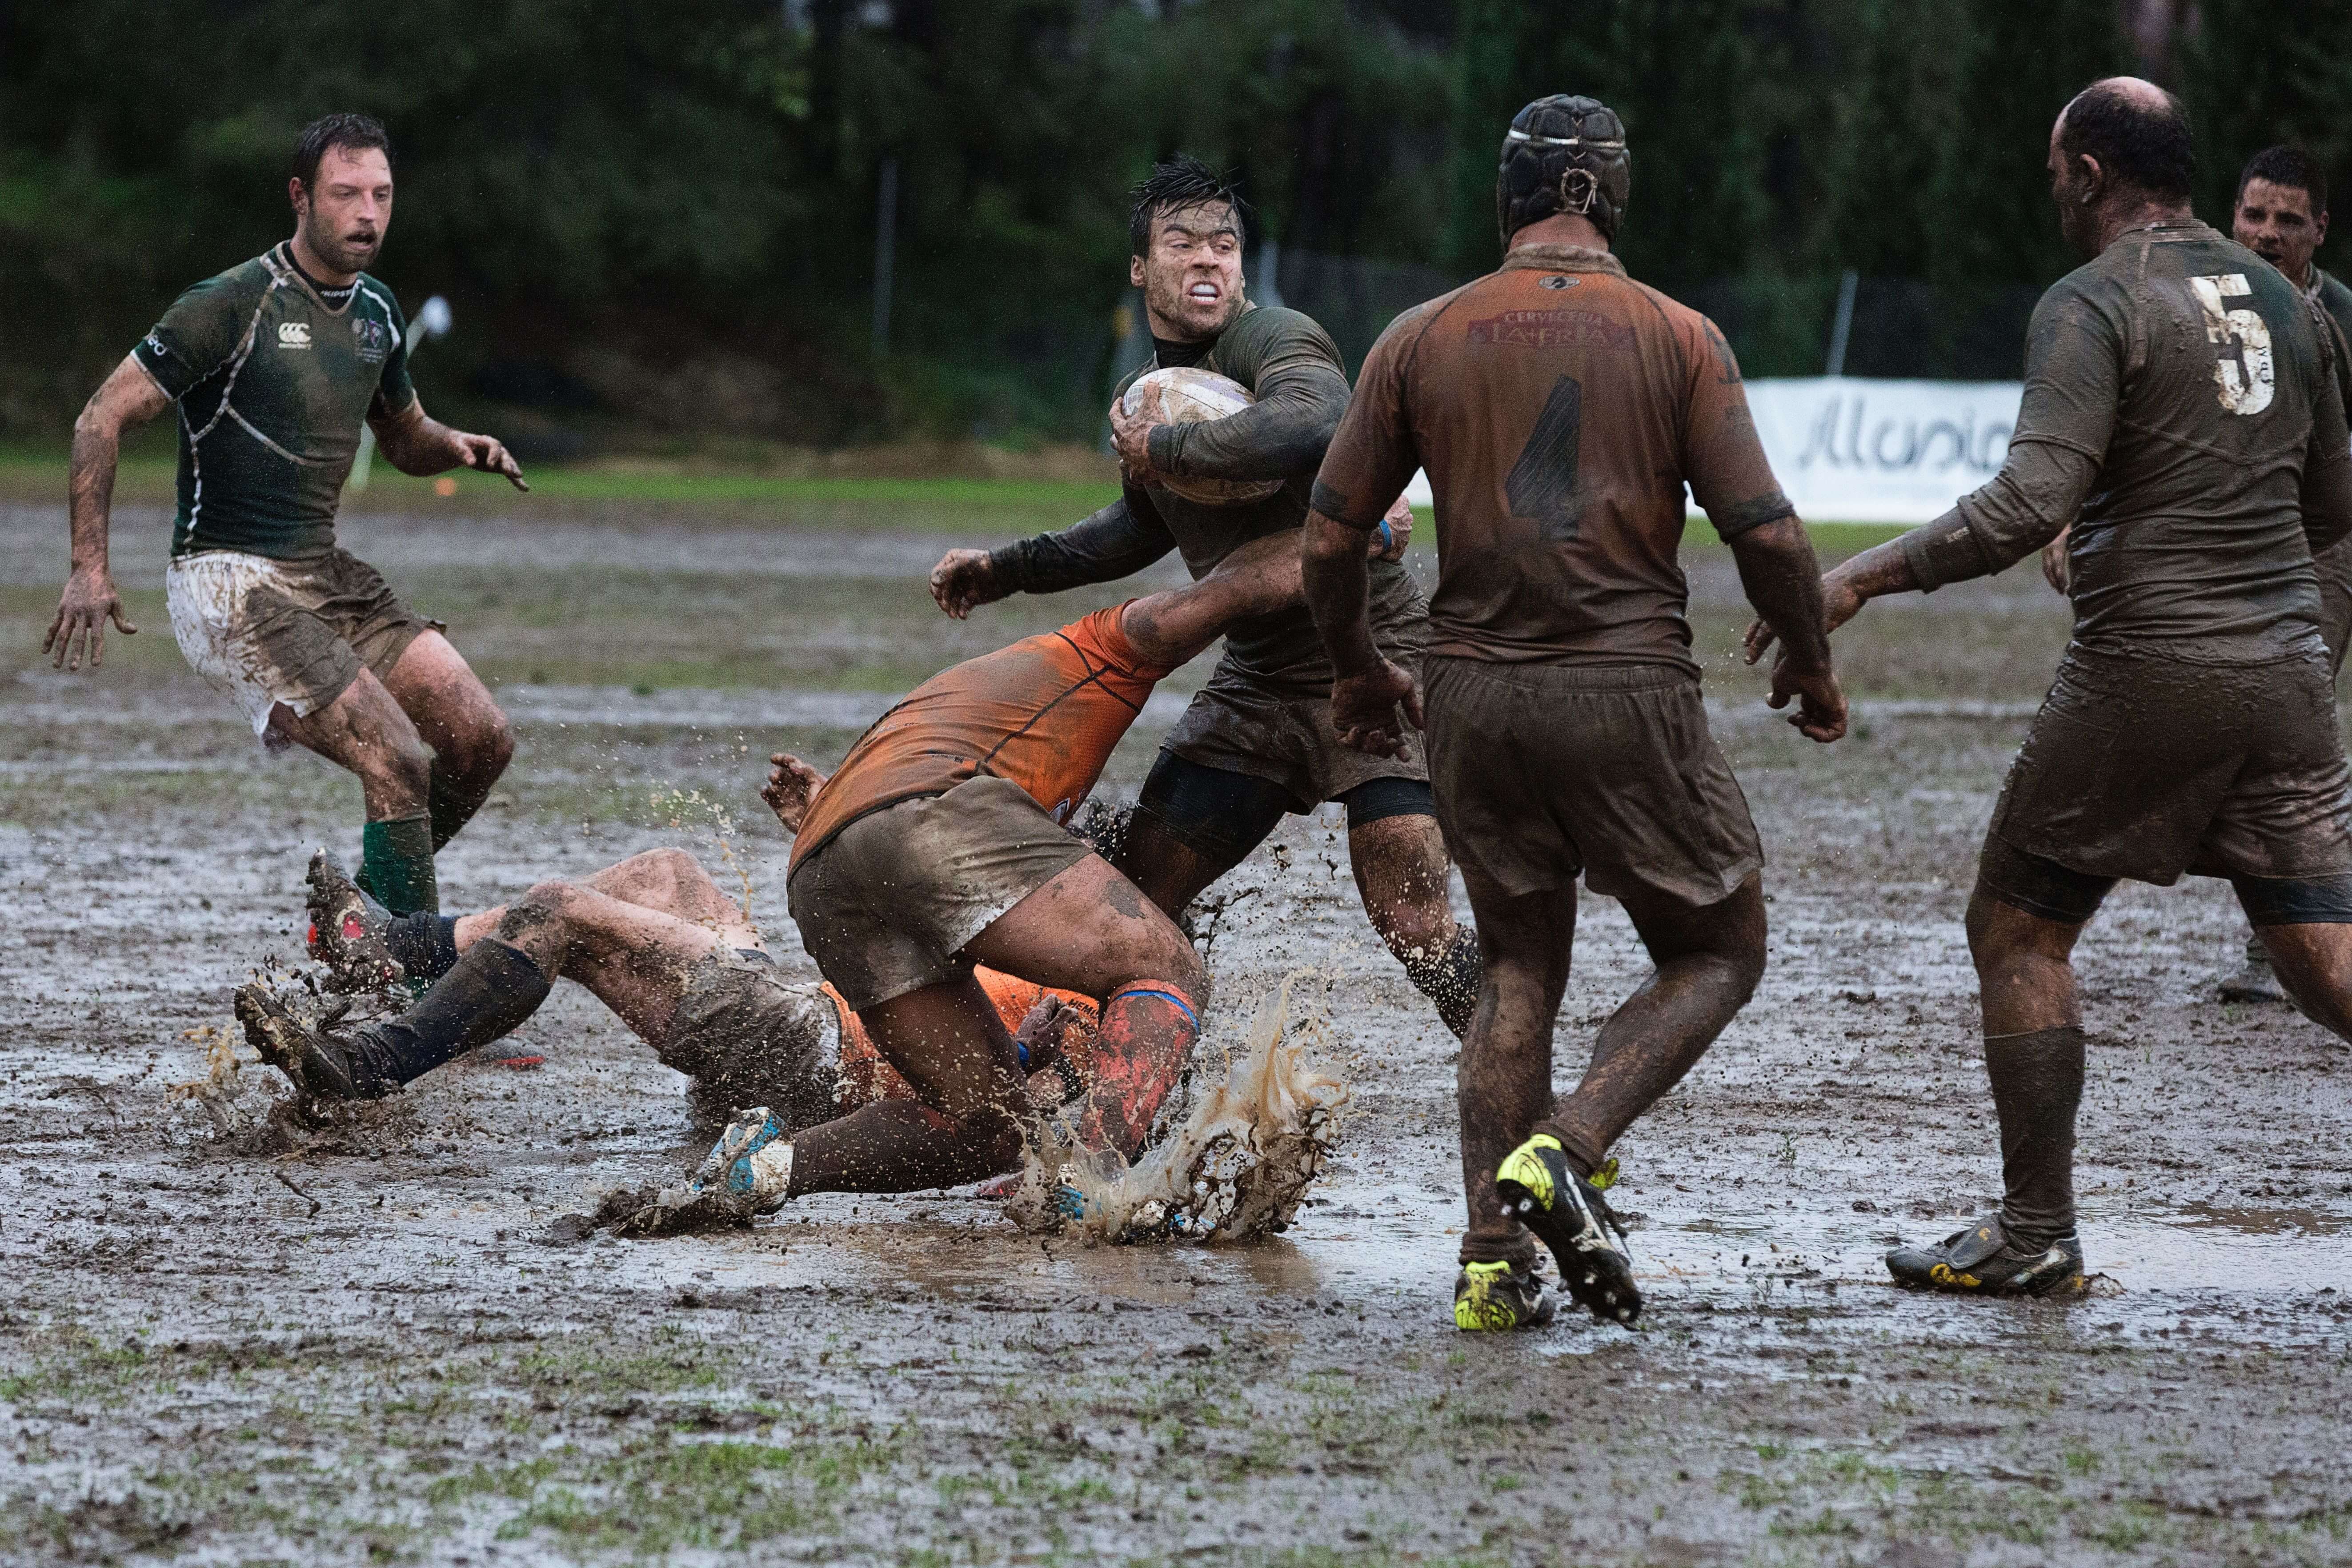 Dirty rugby match